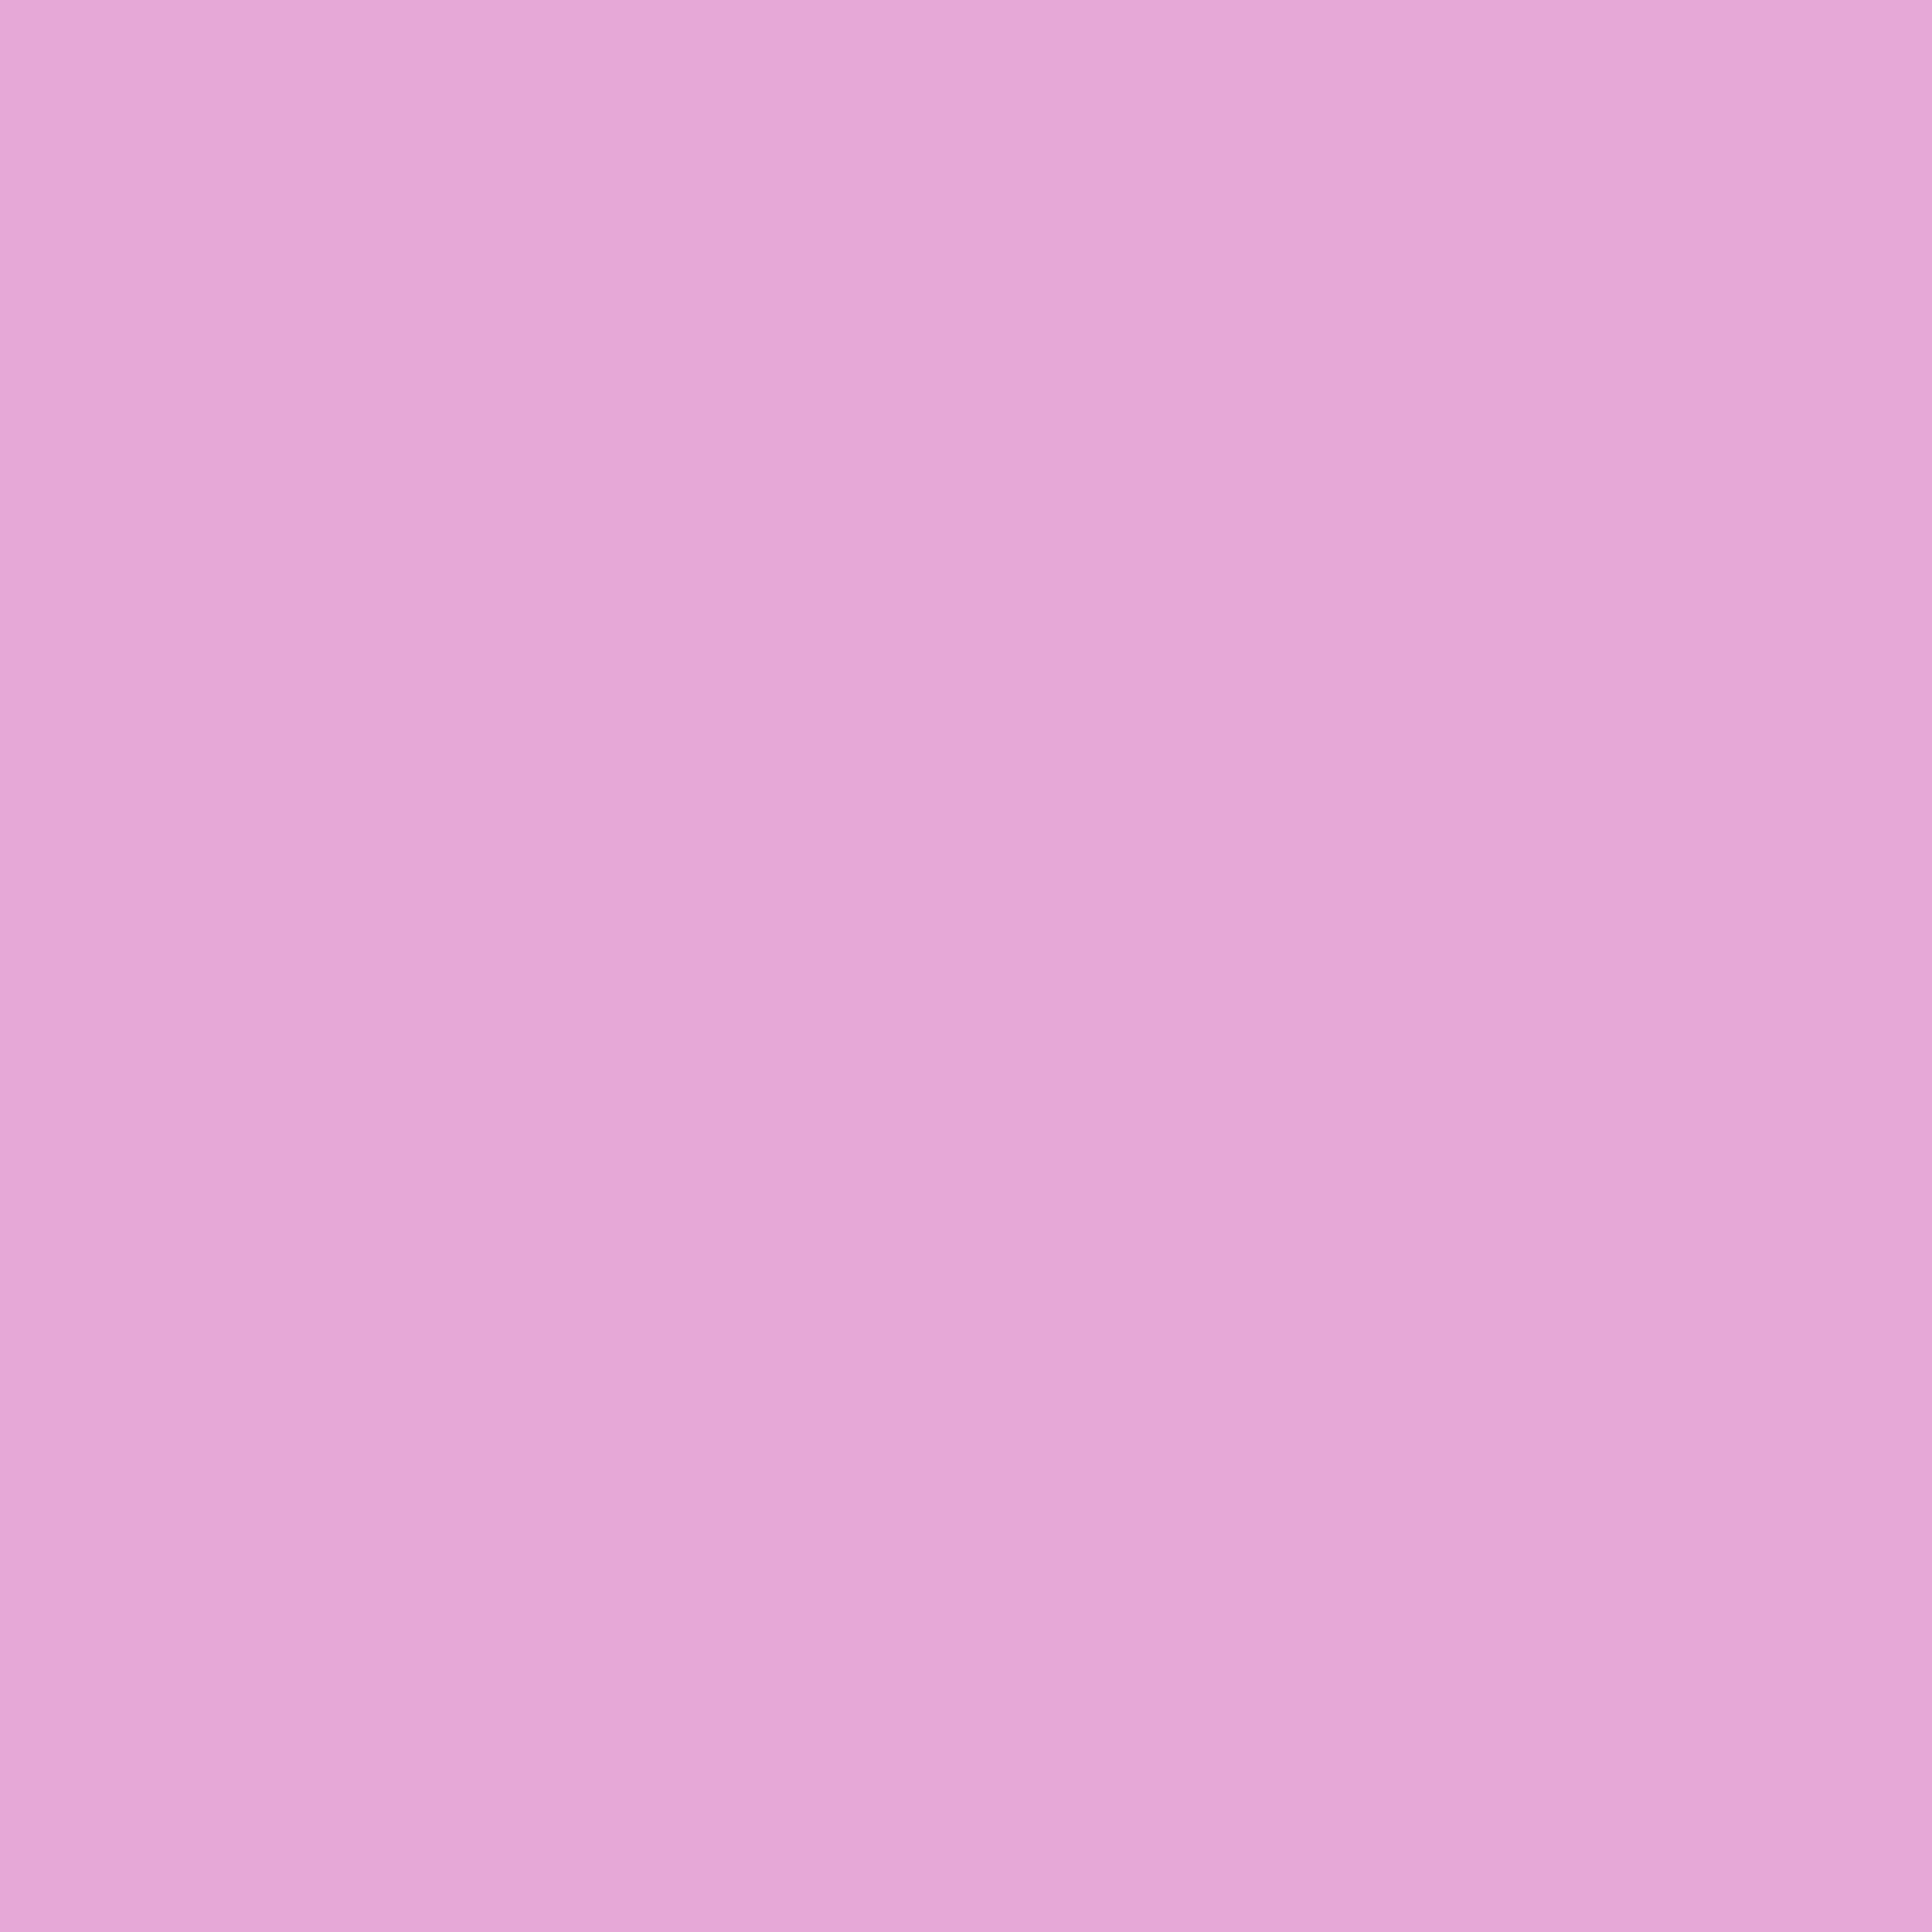 2732x2732 Light Orchid Solid Color Background